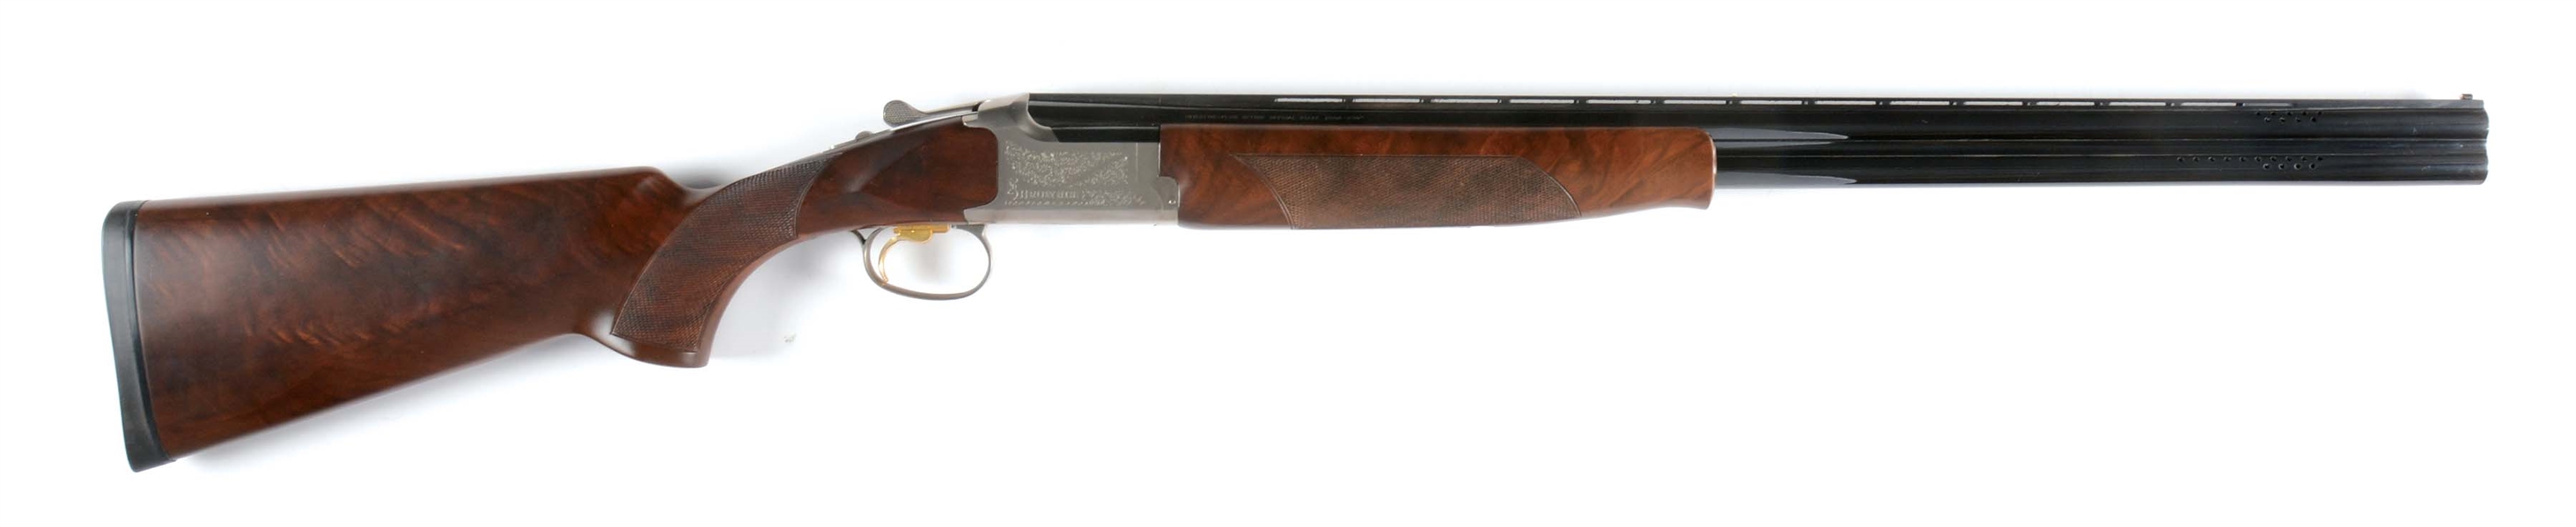 (M) BROWNING CITORI GRADE 1 MDL 425 OVER UNDER SHOTGUN WITH BOX.